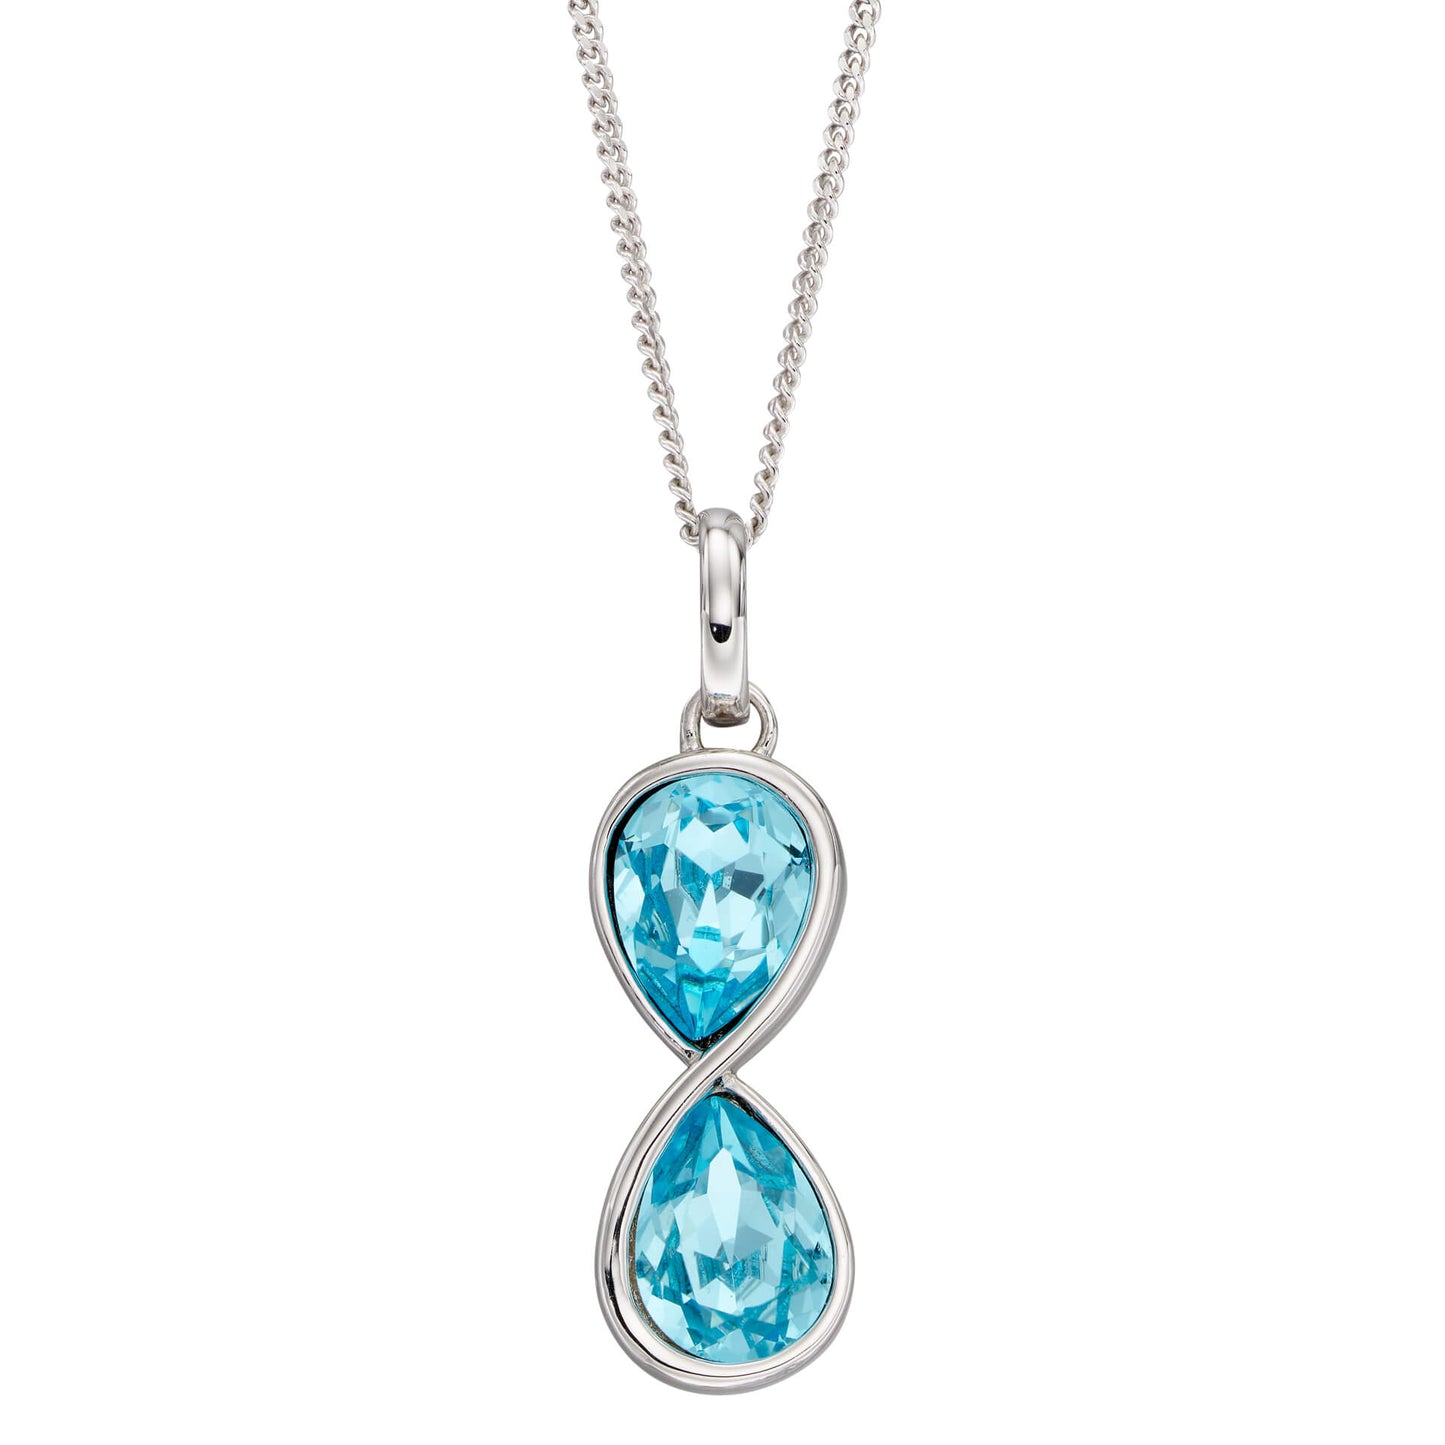 Fiorelli Silver and blue Crystal infinity Pendant